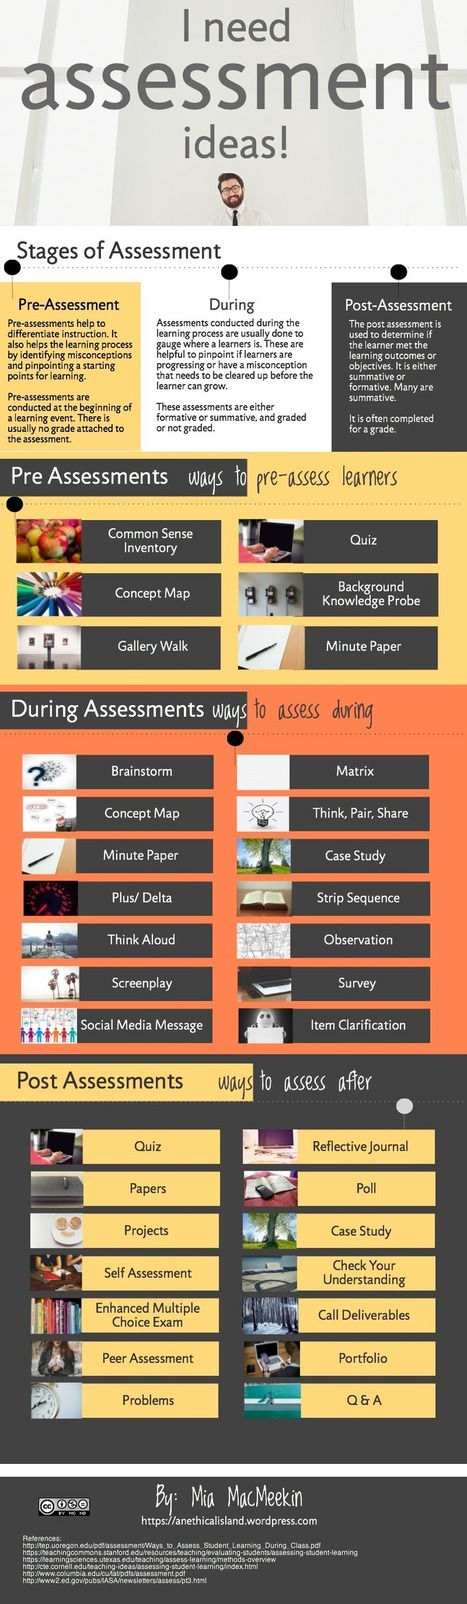 Assessment Ideas | Professional Learning for Busy Educators | Scoop.it